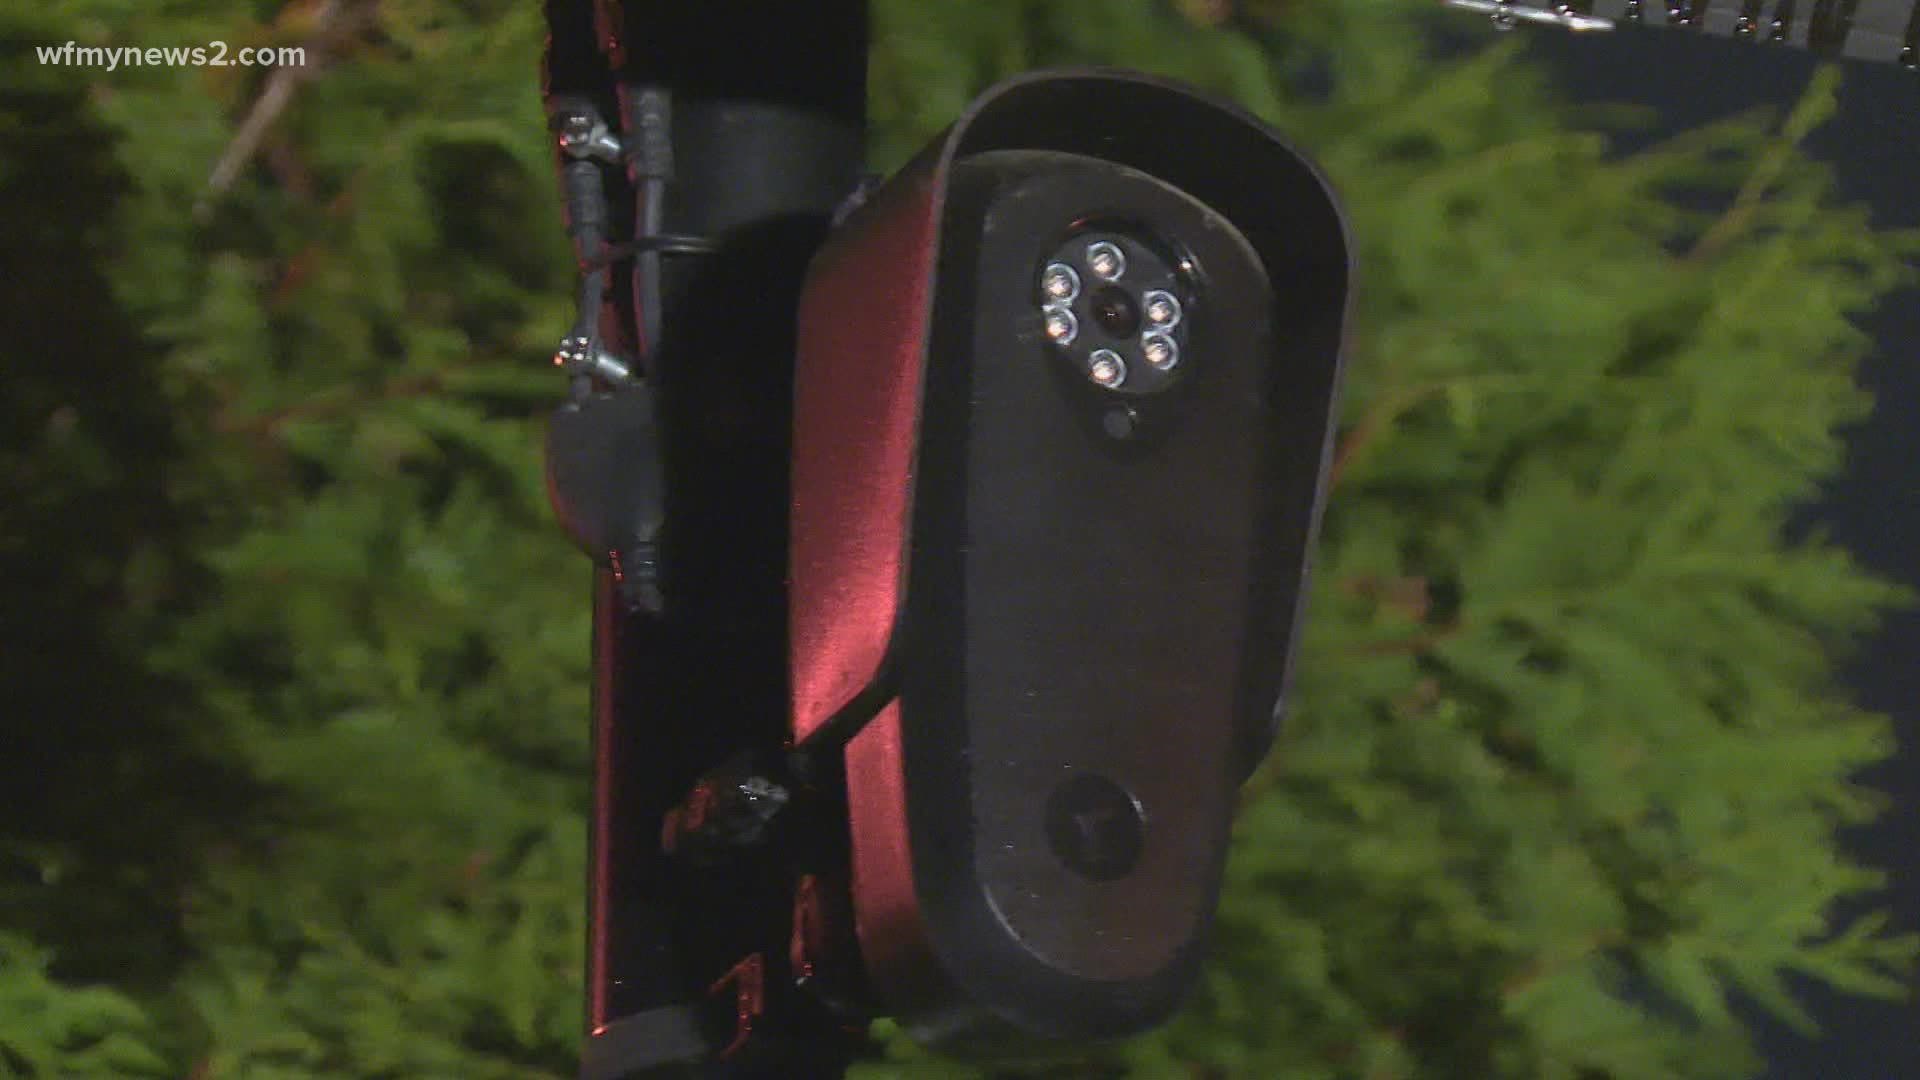 Greensboro Police are in the process of installing 10 cameras around the city that can read license plates.